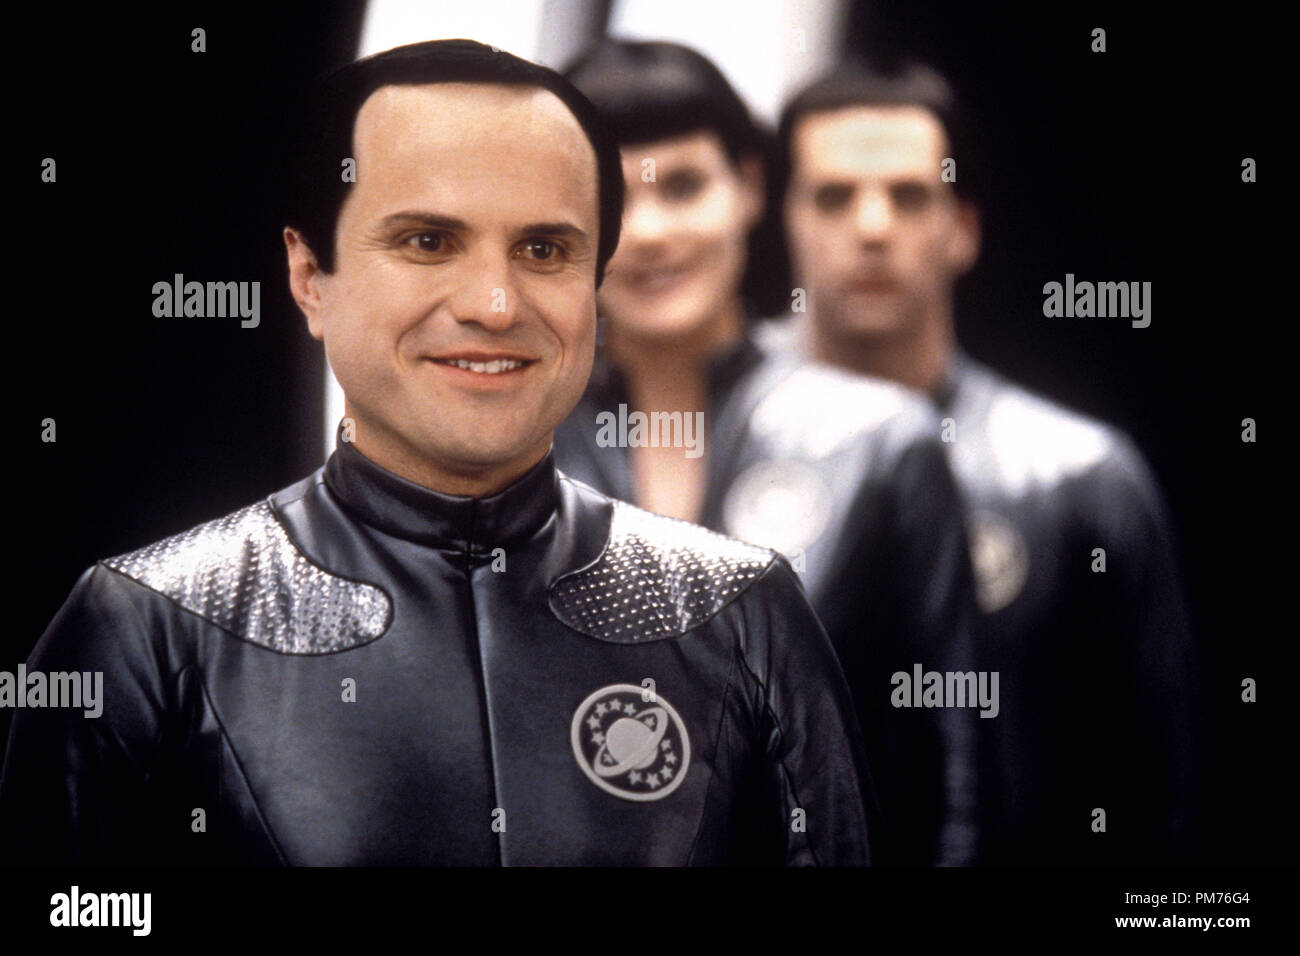 galaxy quest thermians